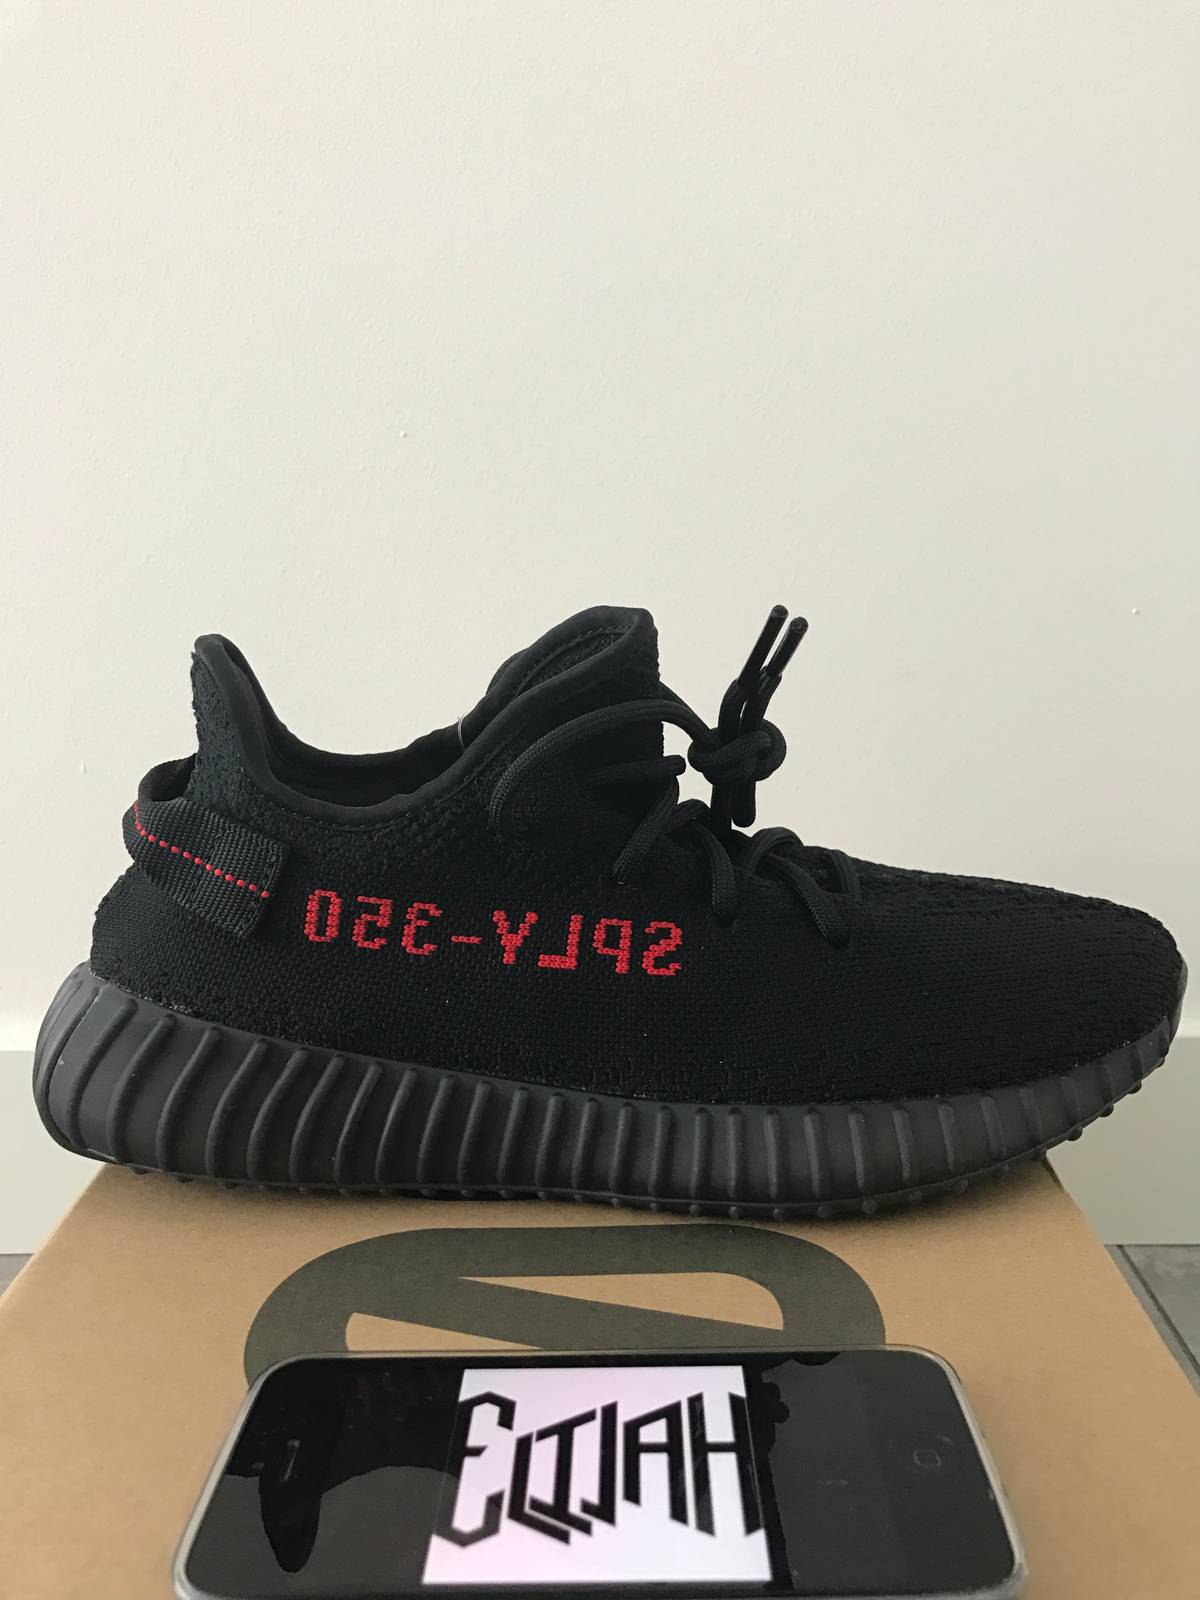 Adidas Yeezy Boost 350 v2 Core Black / Red BRED CP 9652 RARE